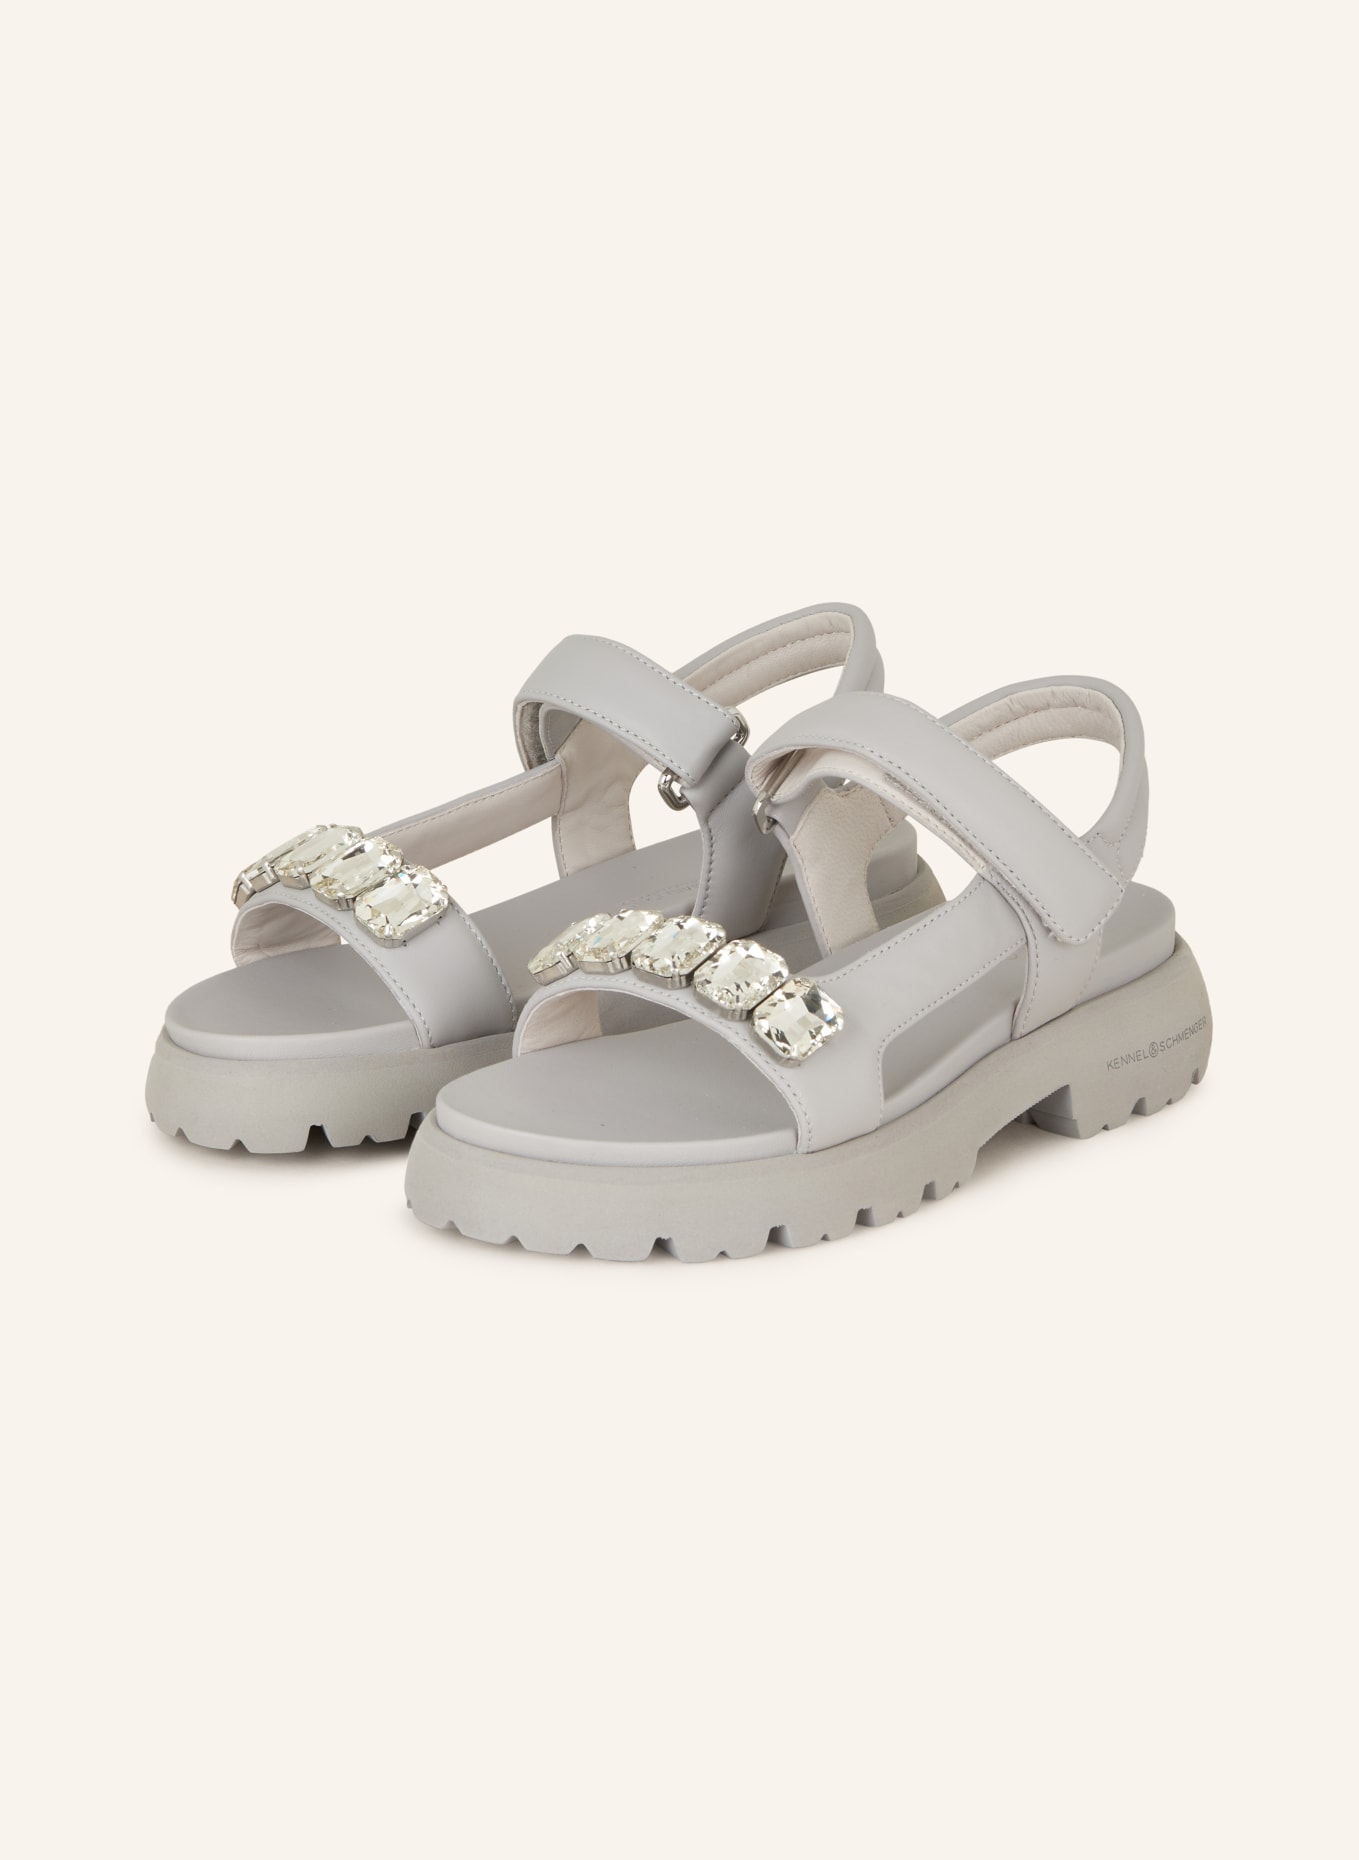 KENNEL & SCHMENGER Sandals SKILL with decorative gems, Color: GRAY (Image 1)